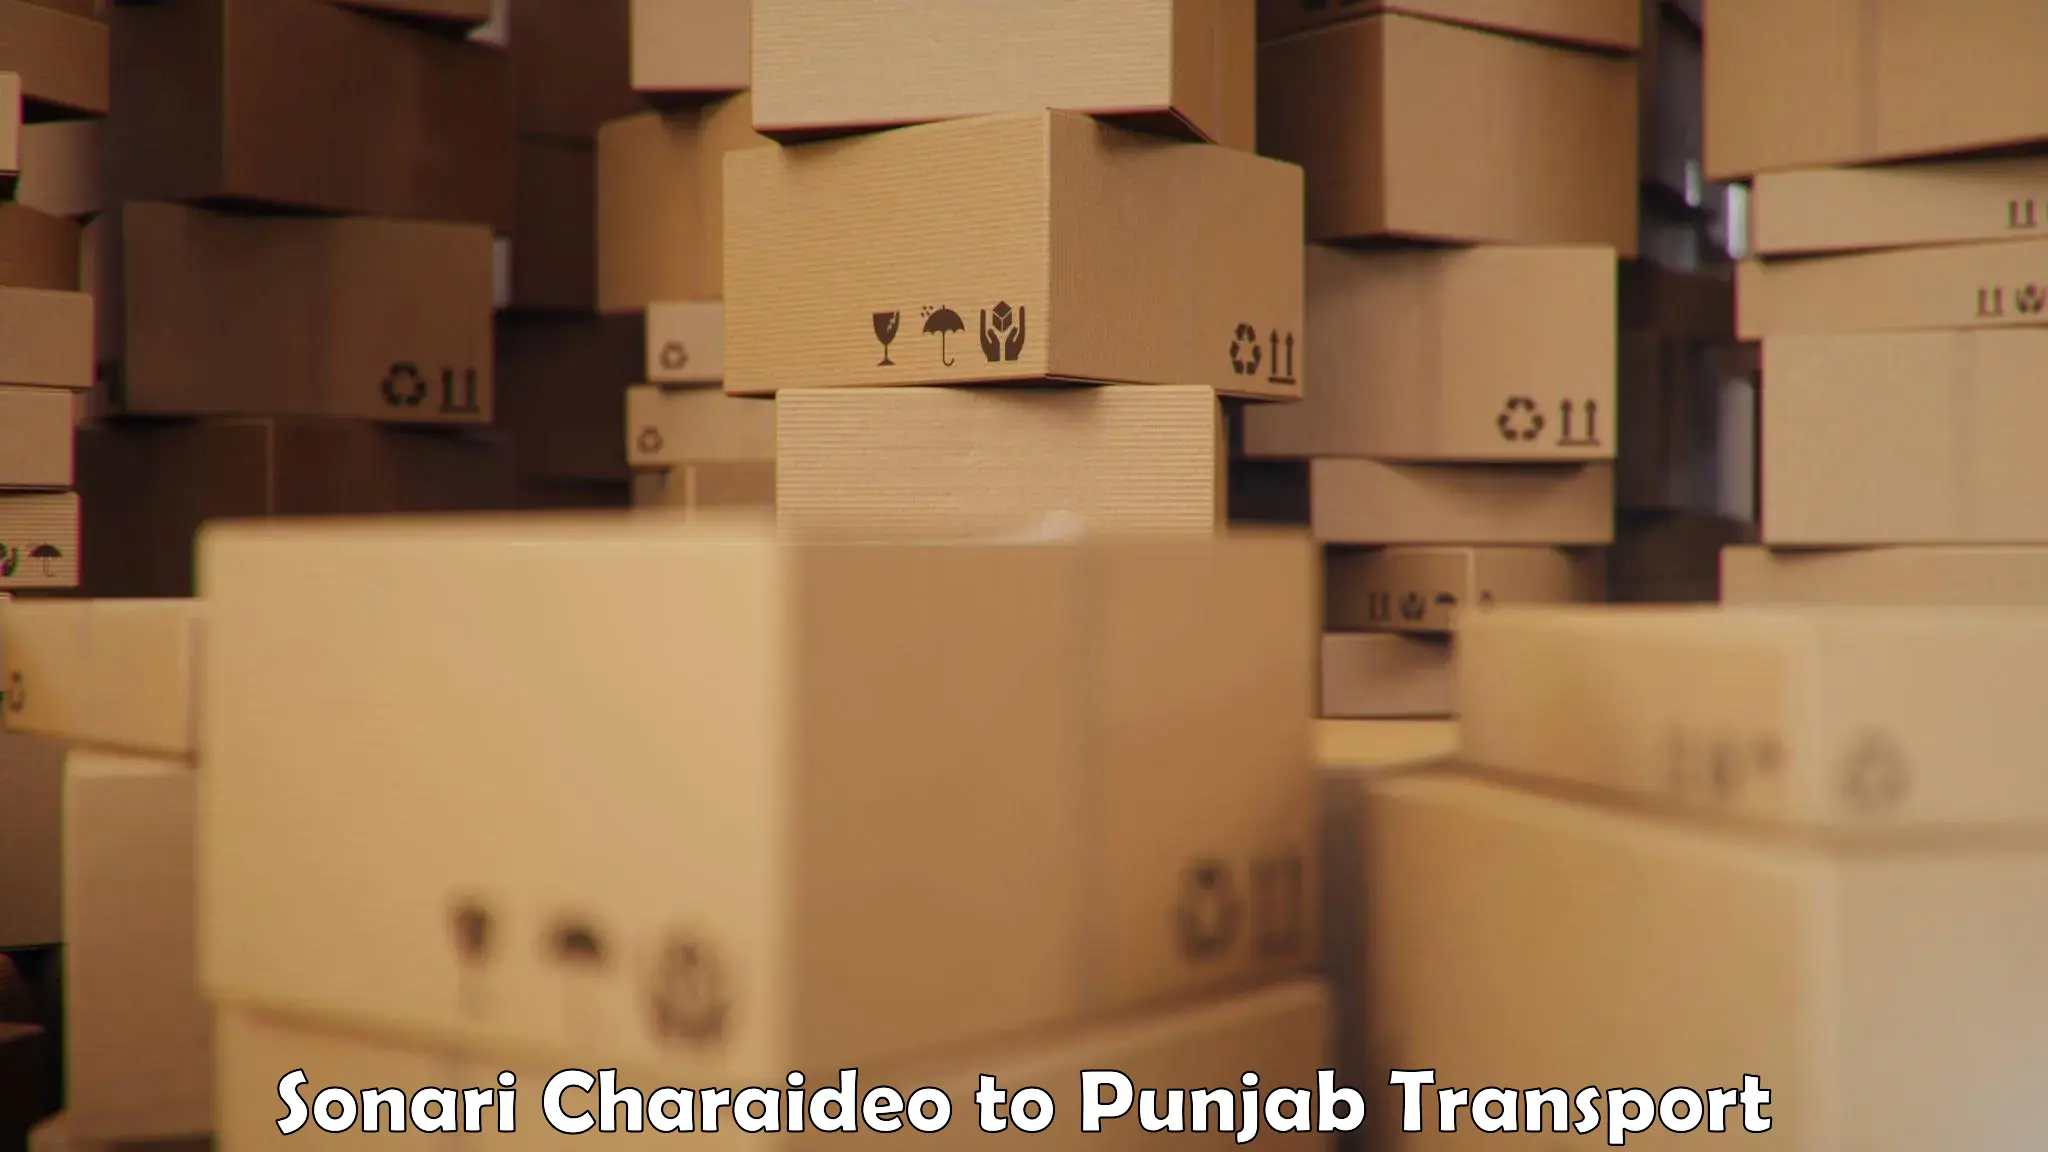 Package delivery services Sonari Charaideo to Mohali